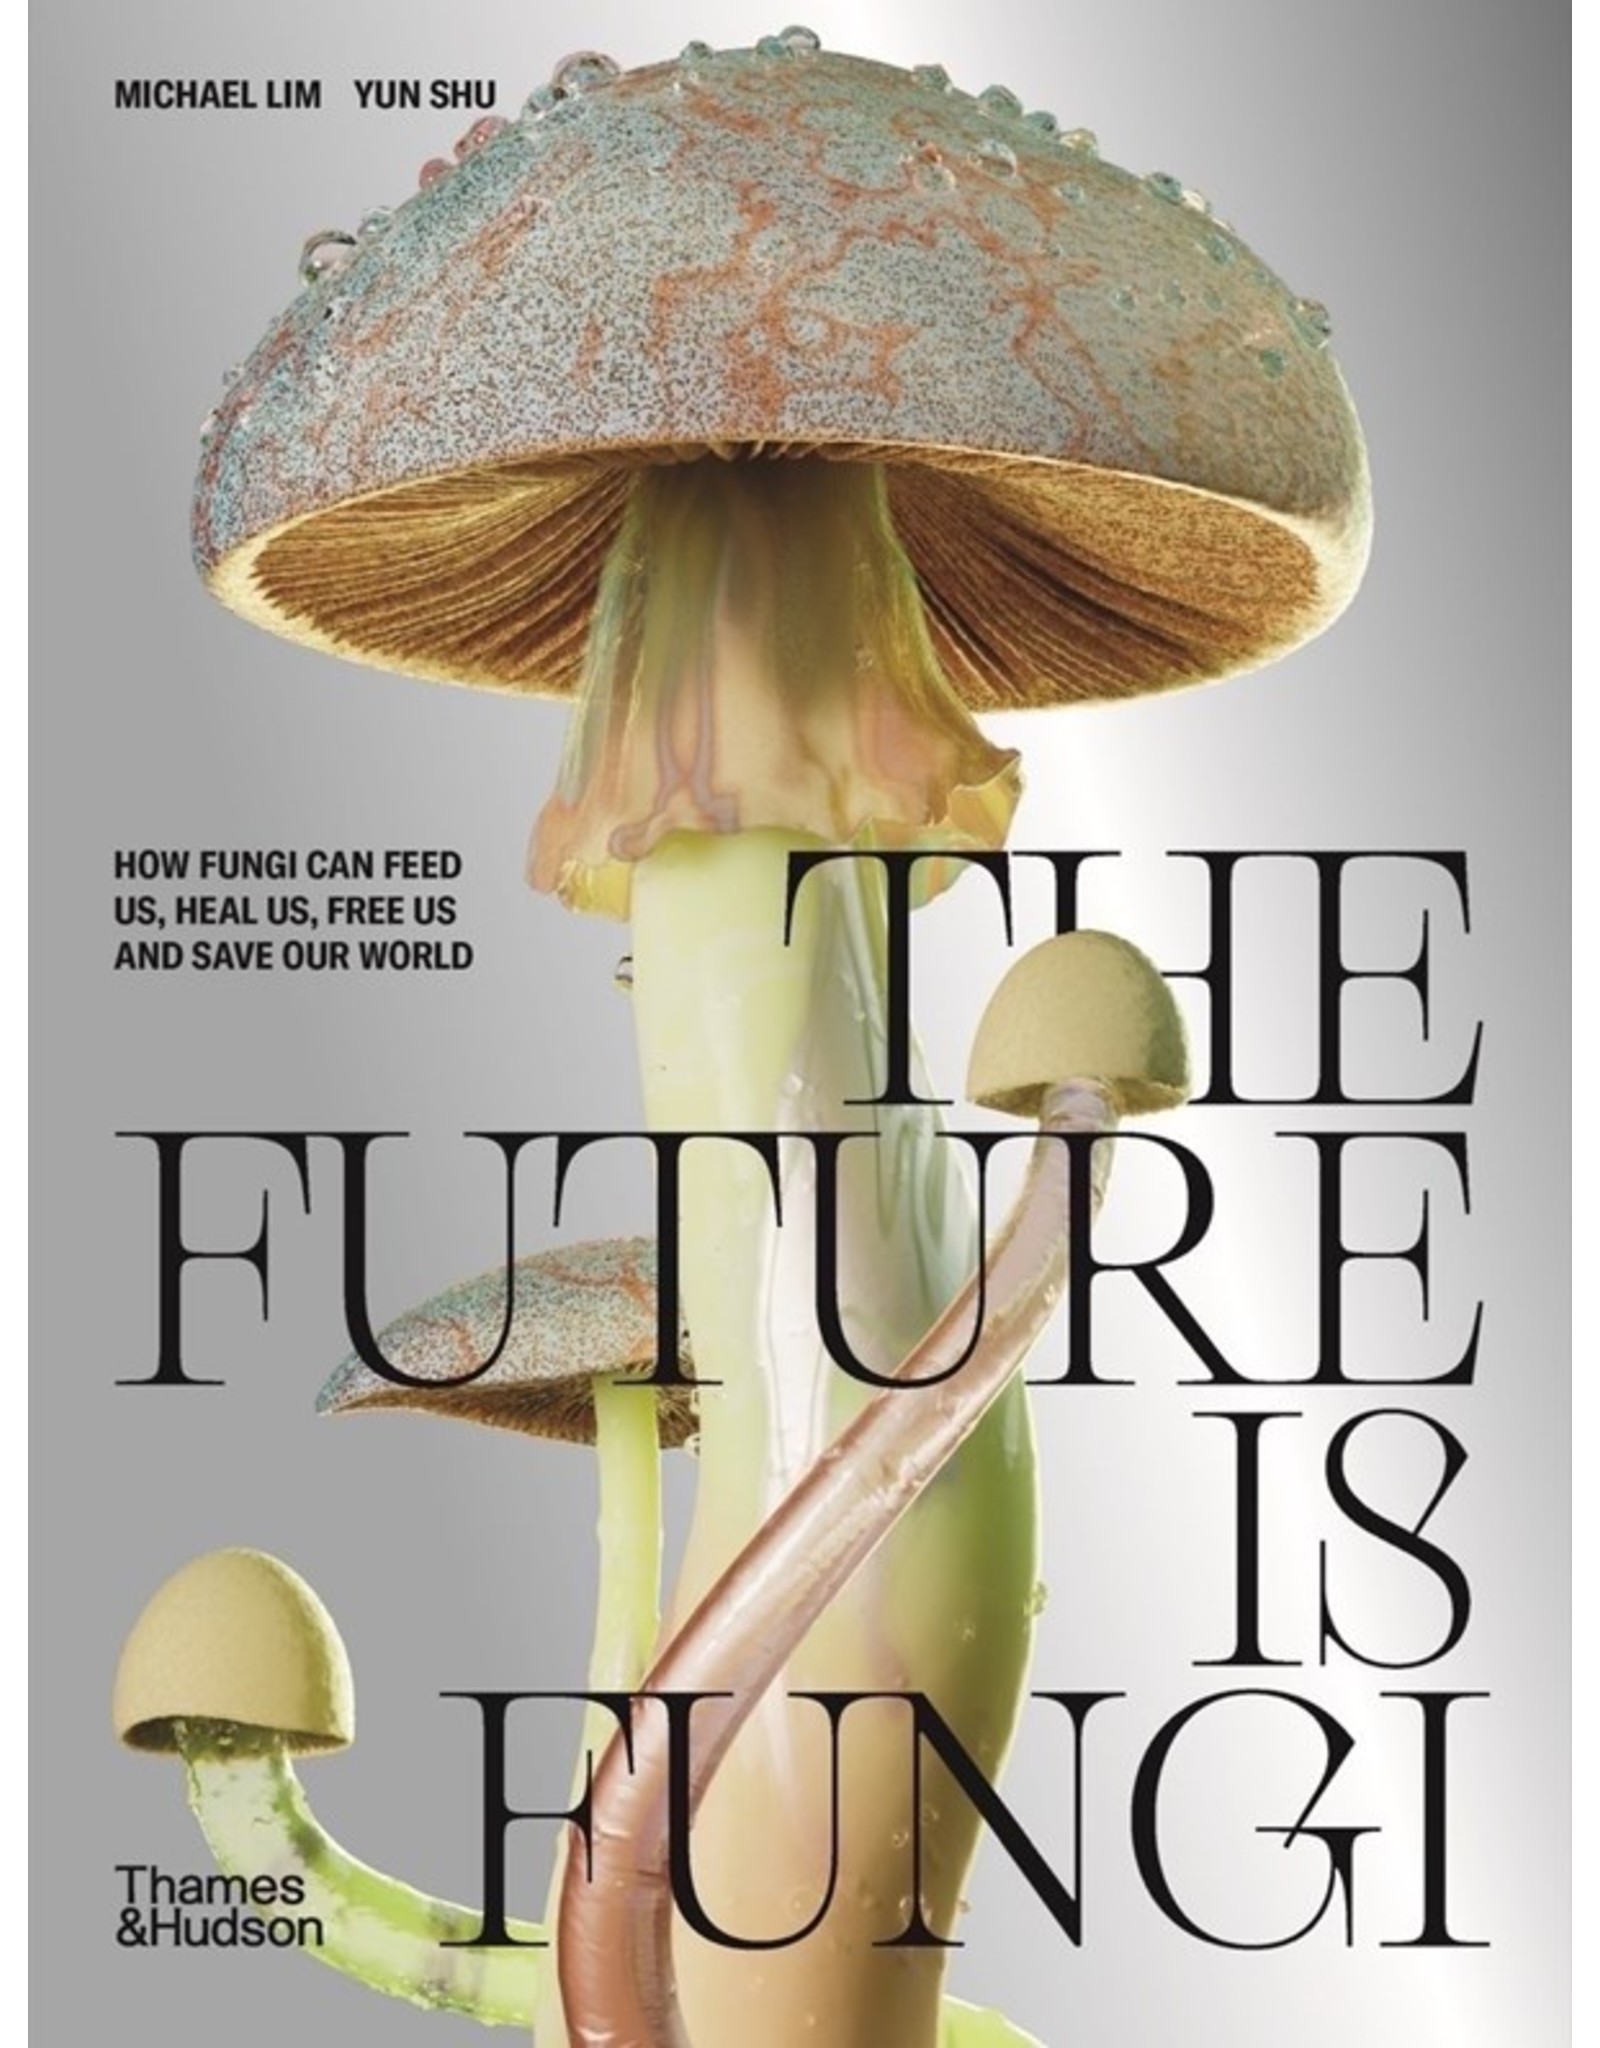 Books The Future is Fungi: How Fungi Can Feed Us, Heal Us and Save Our World by Michael Lim and Yun Shu